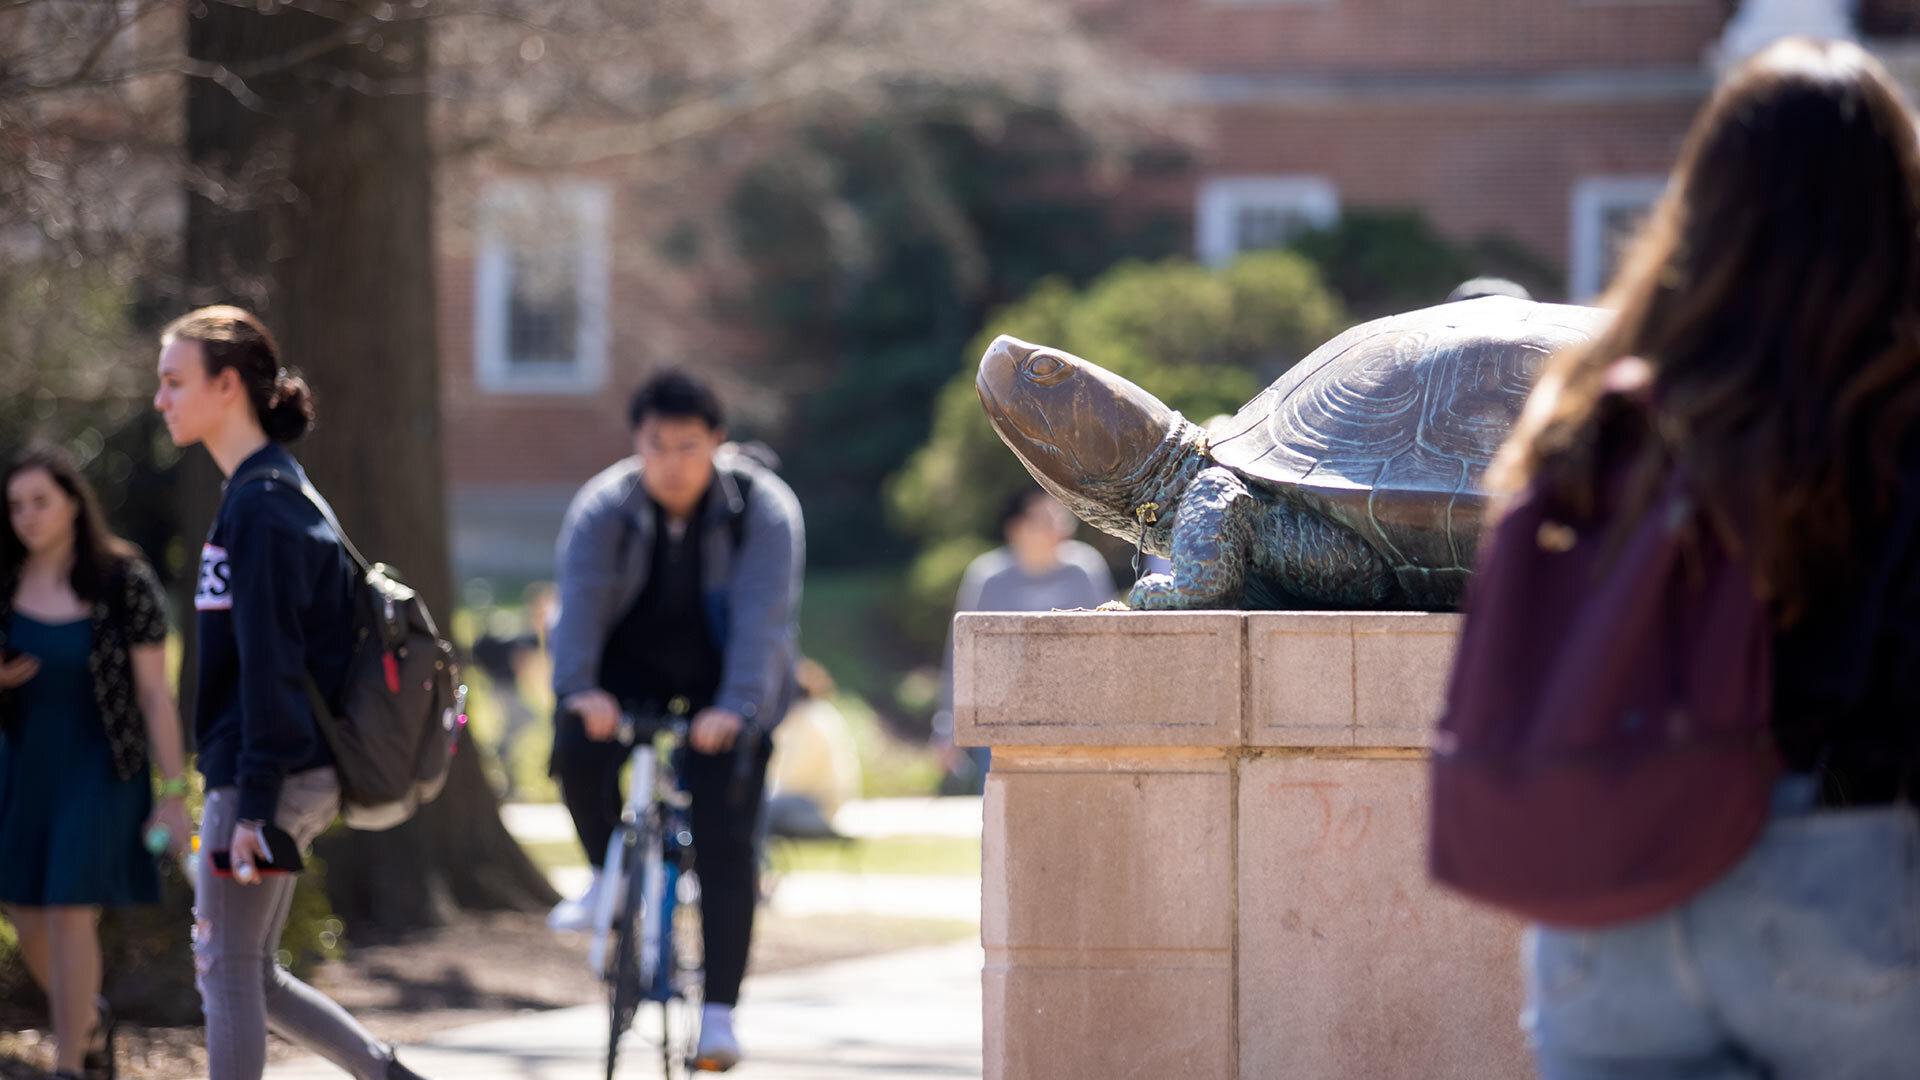 Students walk by the Testudo terrapin statue on UMD campus